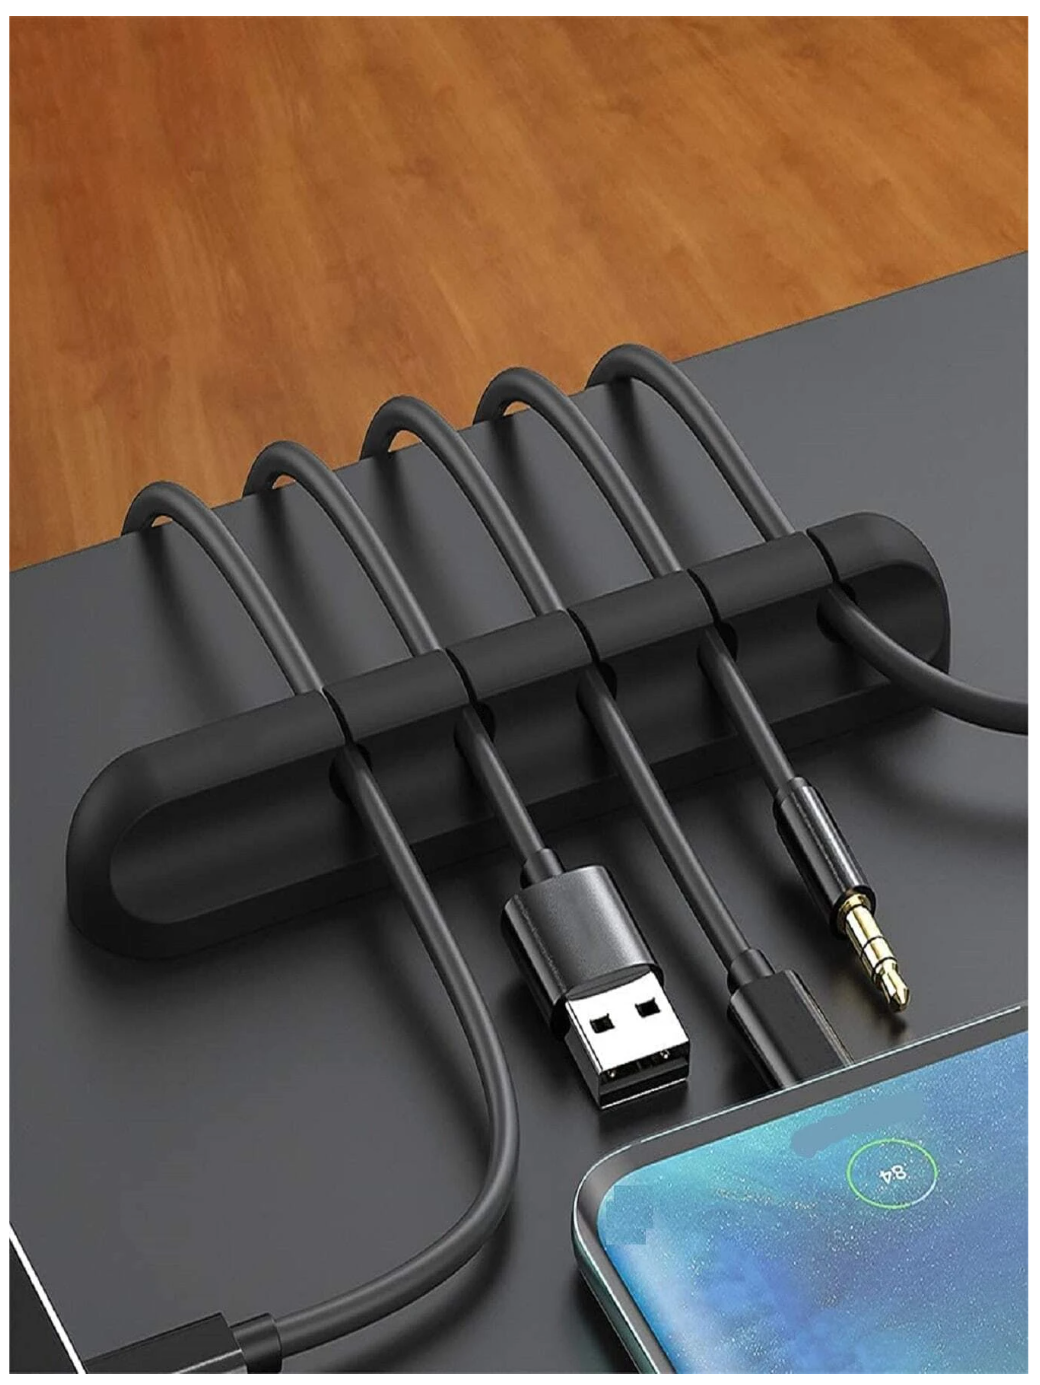 Desk Delight: Universal Desktop Data Cable Fixing Clip for a Tangle-Free Tech Haven!